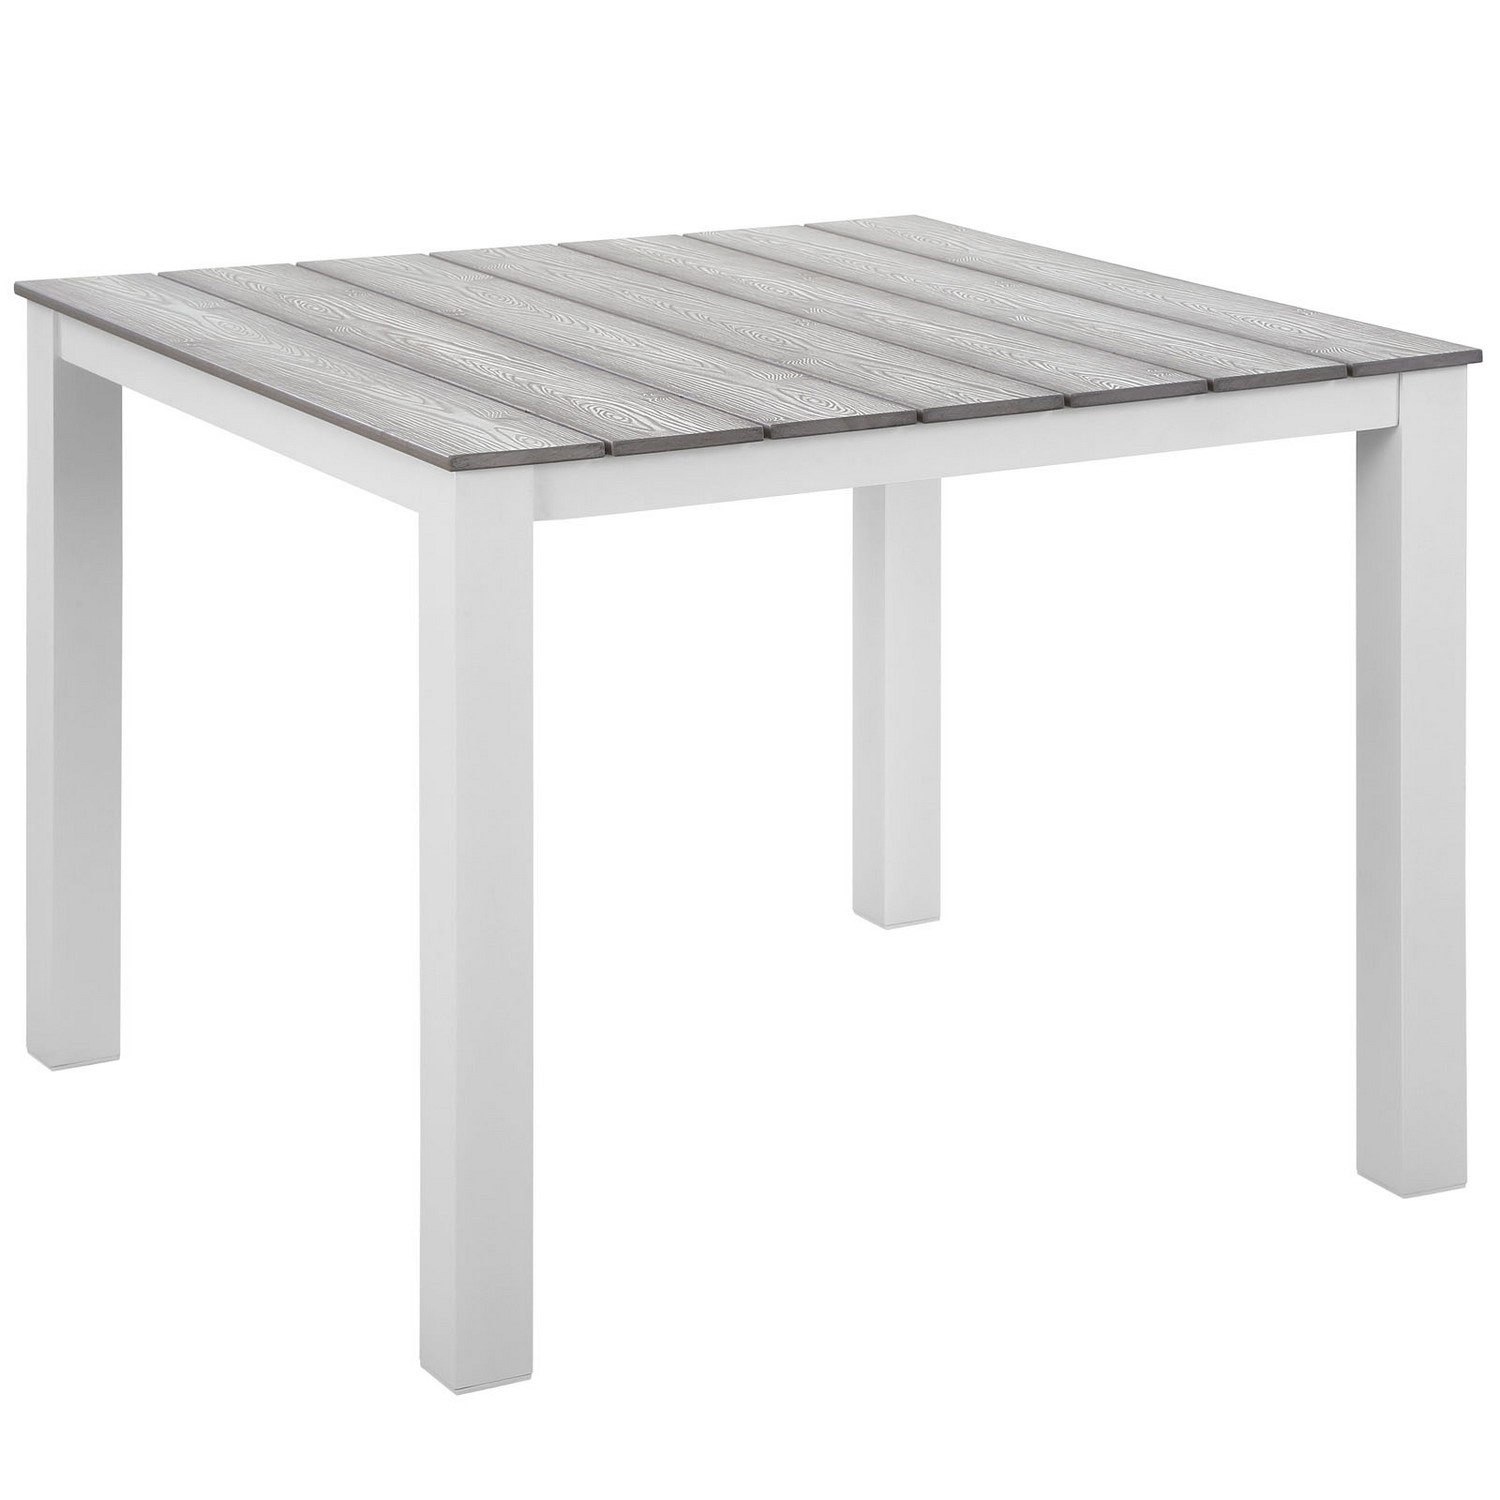 Modway Maine 40 Outdoor Patio Dining Table - White/Light Gray